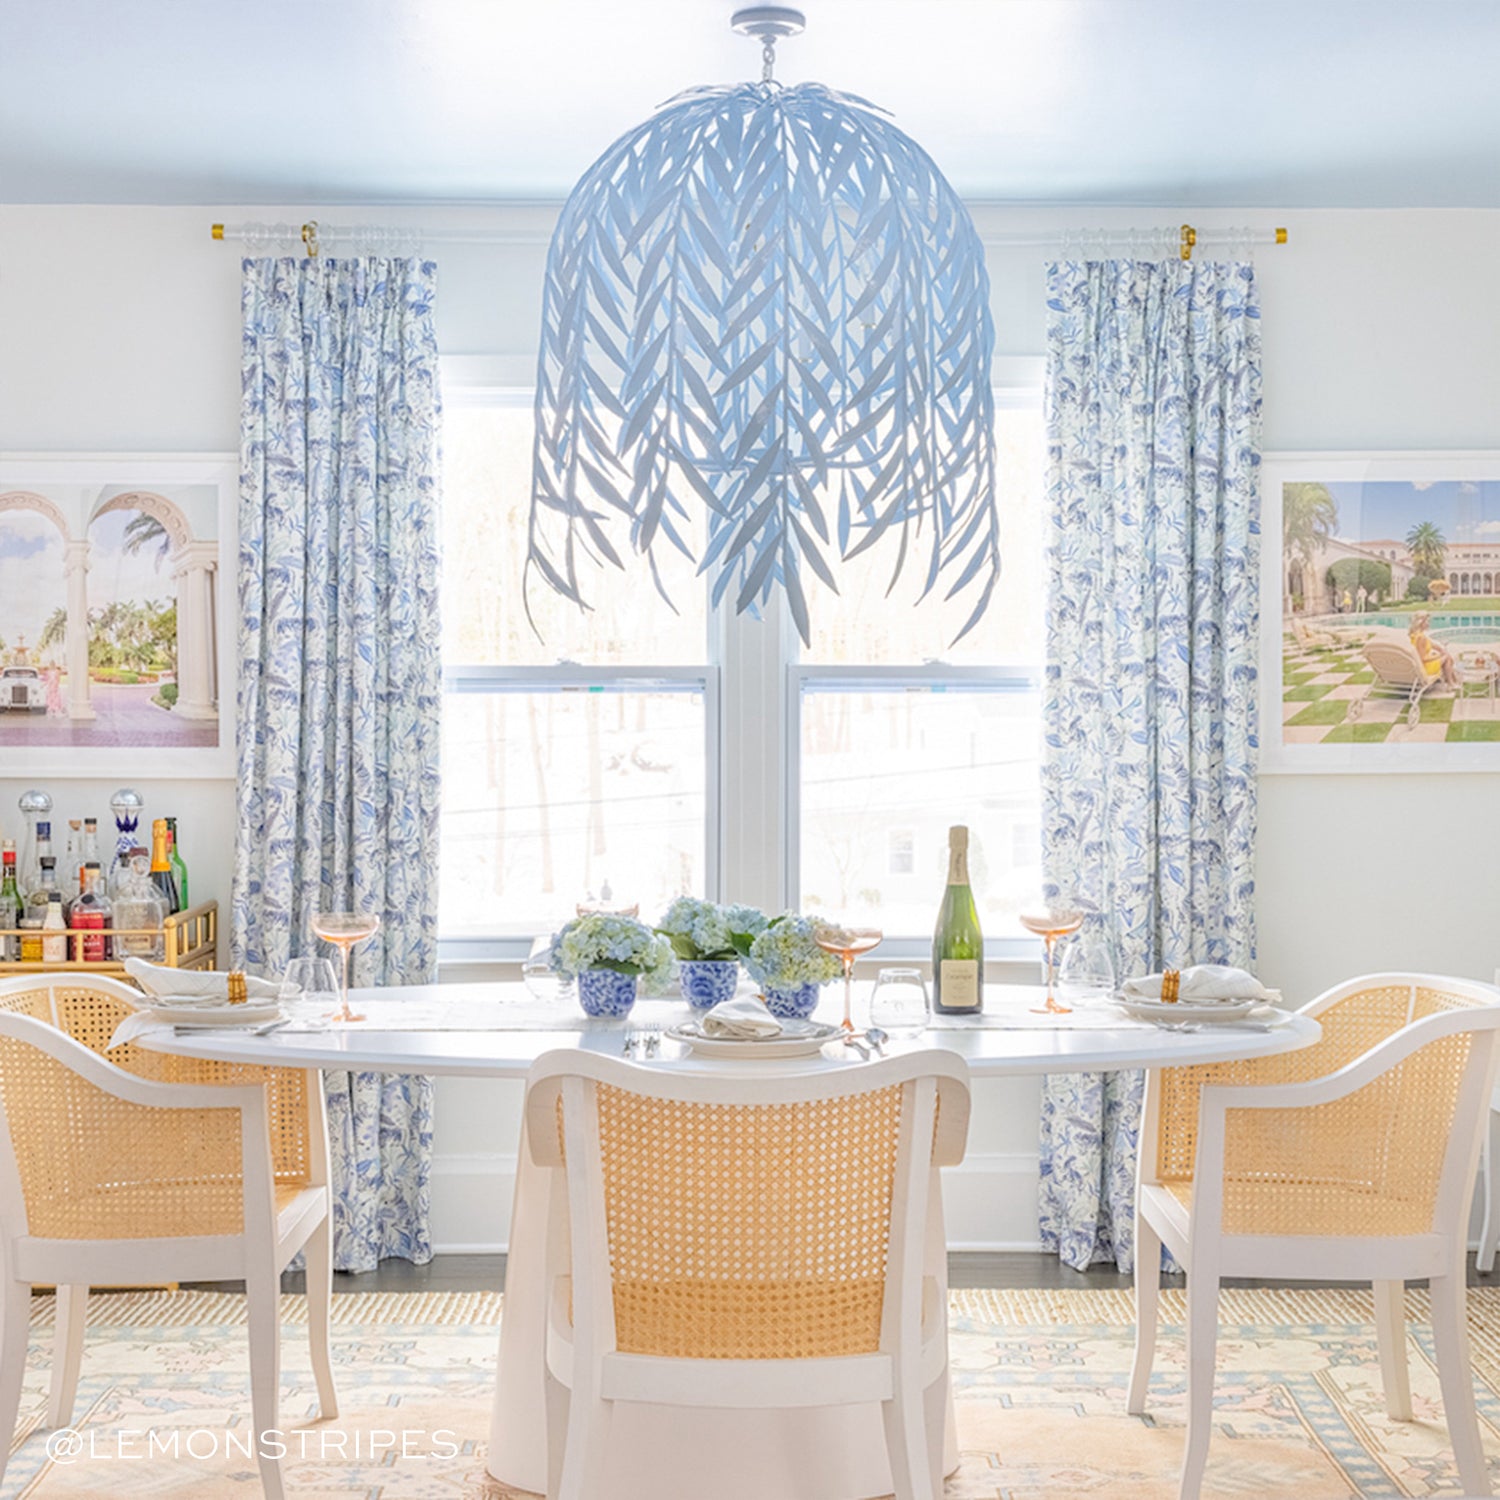 Dining room styled with Blue With Intricate Tiger Design Printed Curtains by illuminated window in front of white table with flowers in three vases as center decorations and blue feather chandelier on the center of the ceiling. Photo taken by Lemon Stripes